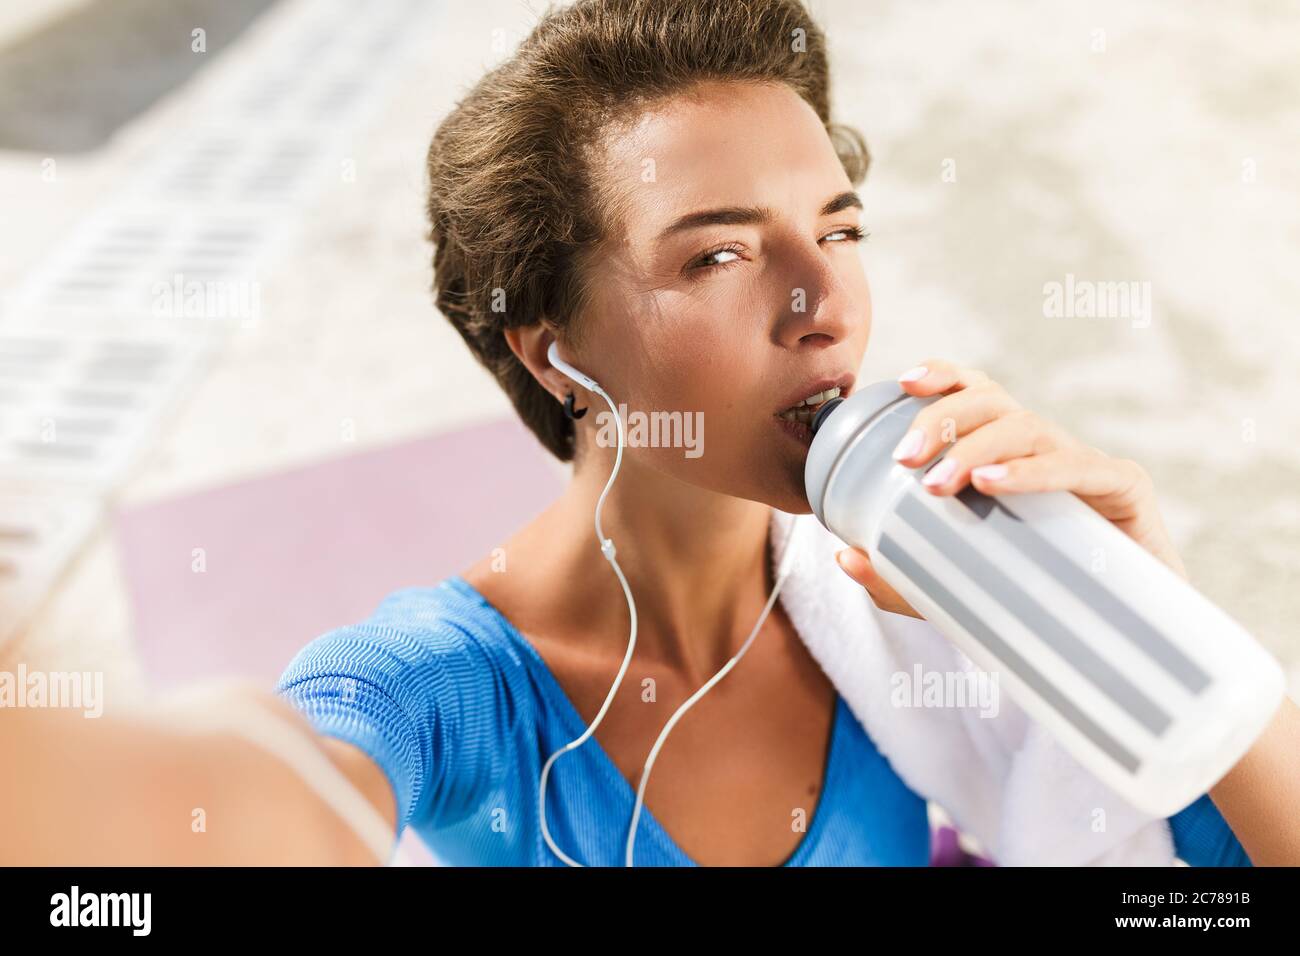 Woman in swimsuit sitting on yoga mat drinking water and taking selfie Stock Photo